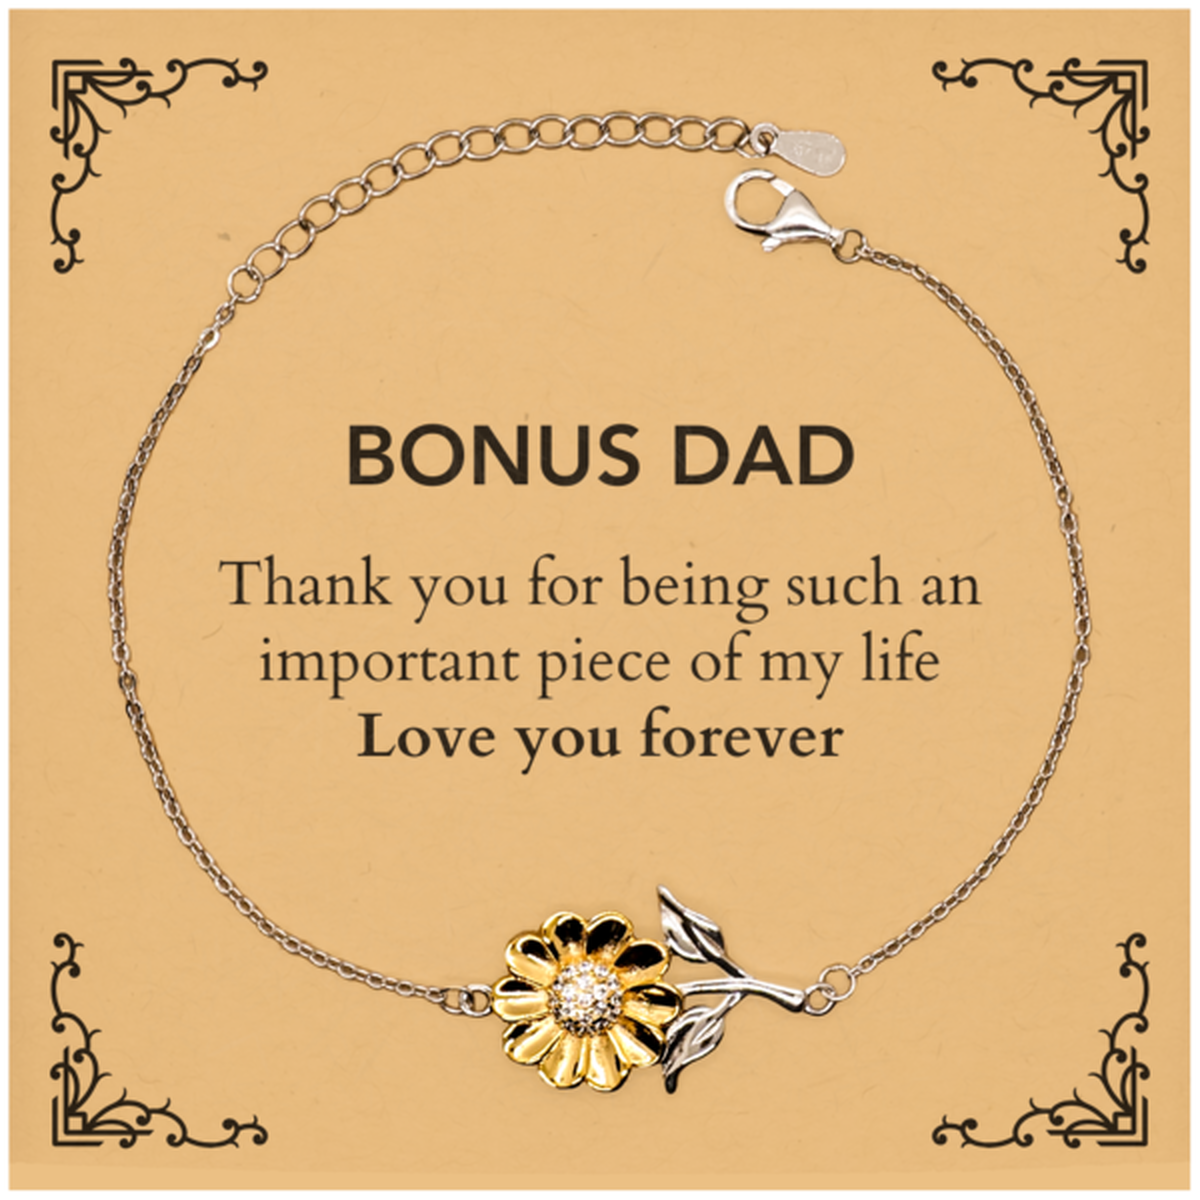 Appropriate Bonus Dad Sunflower Bracelet Epic Birthday Gifts for Bonus Dad Thank you for being such an important piece of my life Bonus Dad Christmas Mothers Fathers Day